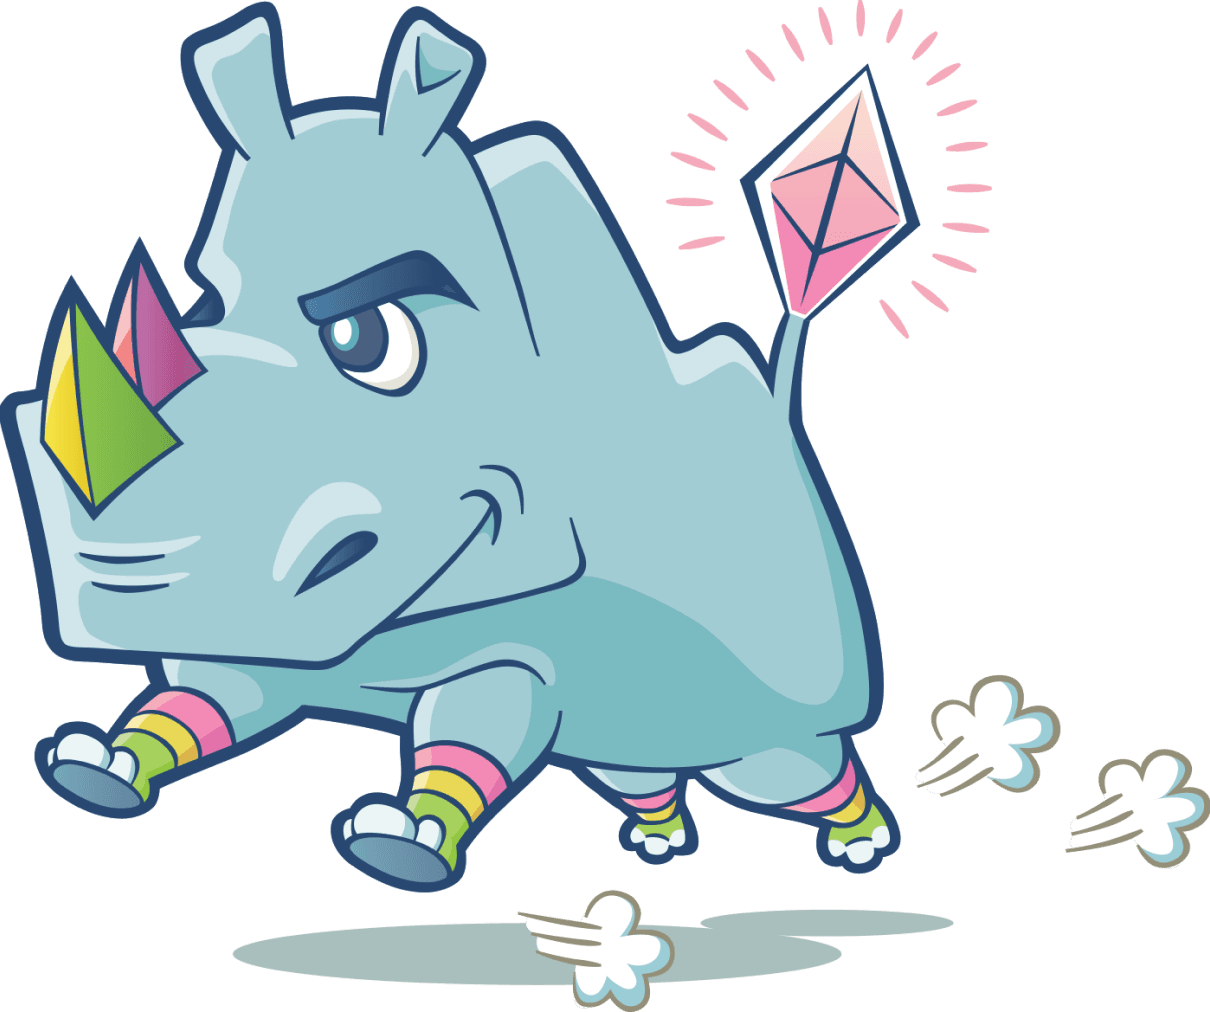 Image of the Rhino mascot for the staking launchpad.